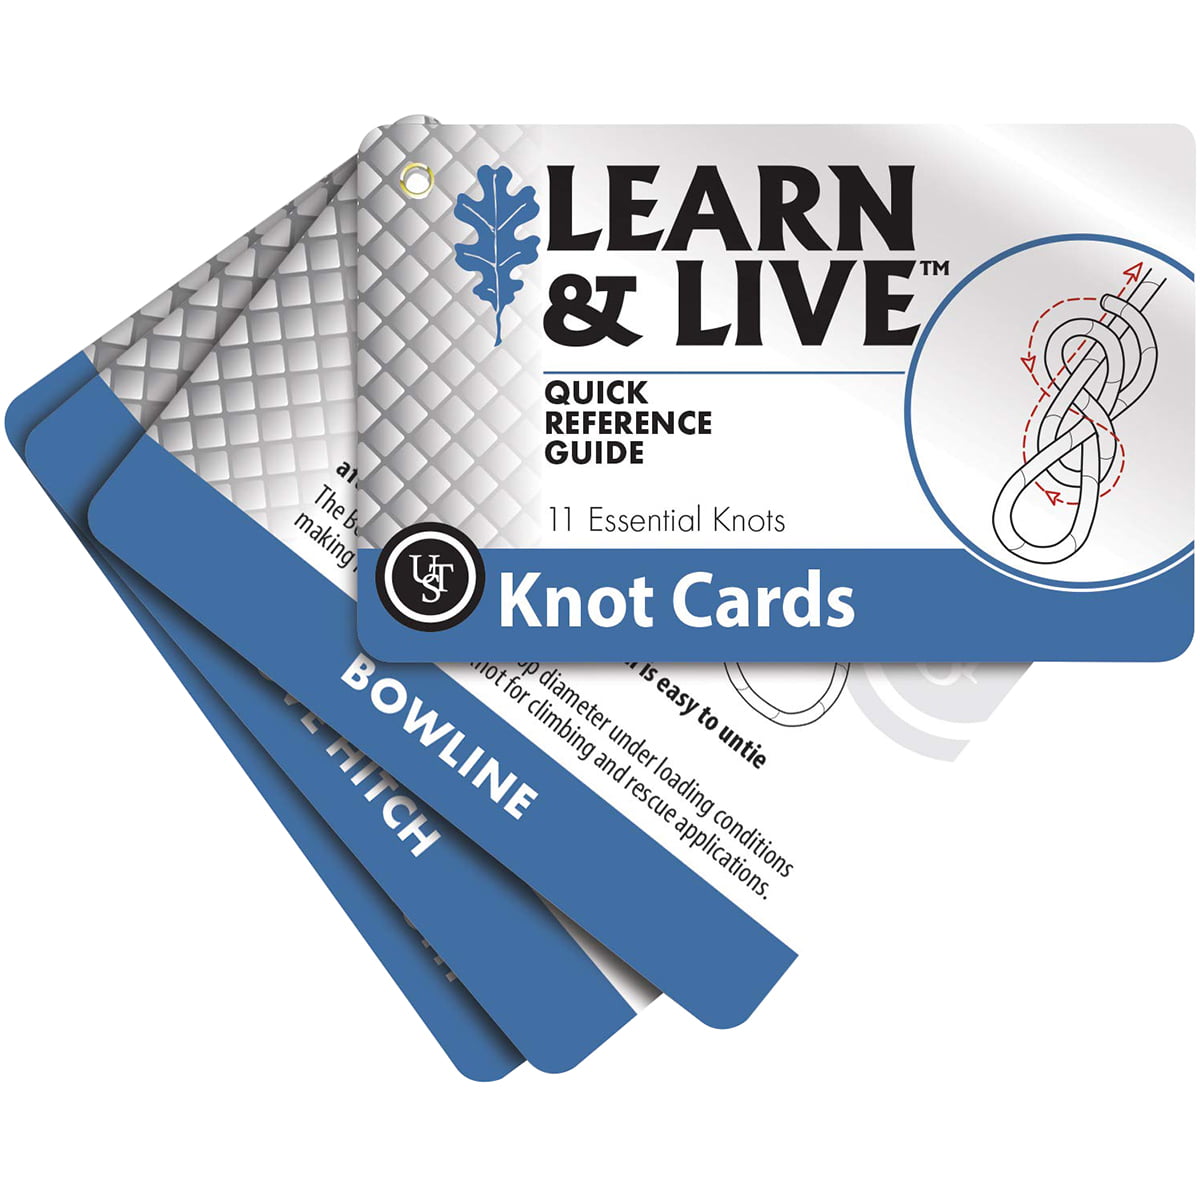 Ultimate Survival Technologies Learn & Live Knot Cards Pocket Reference Guide 